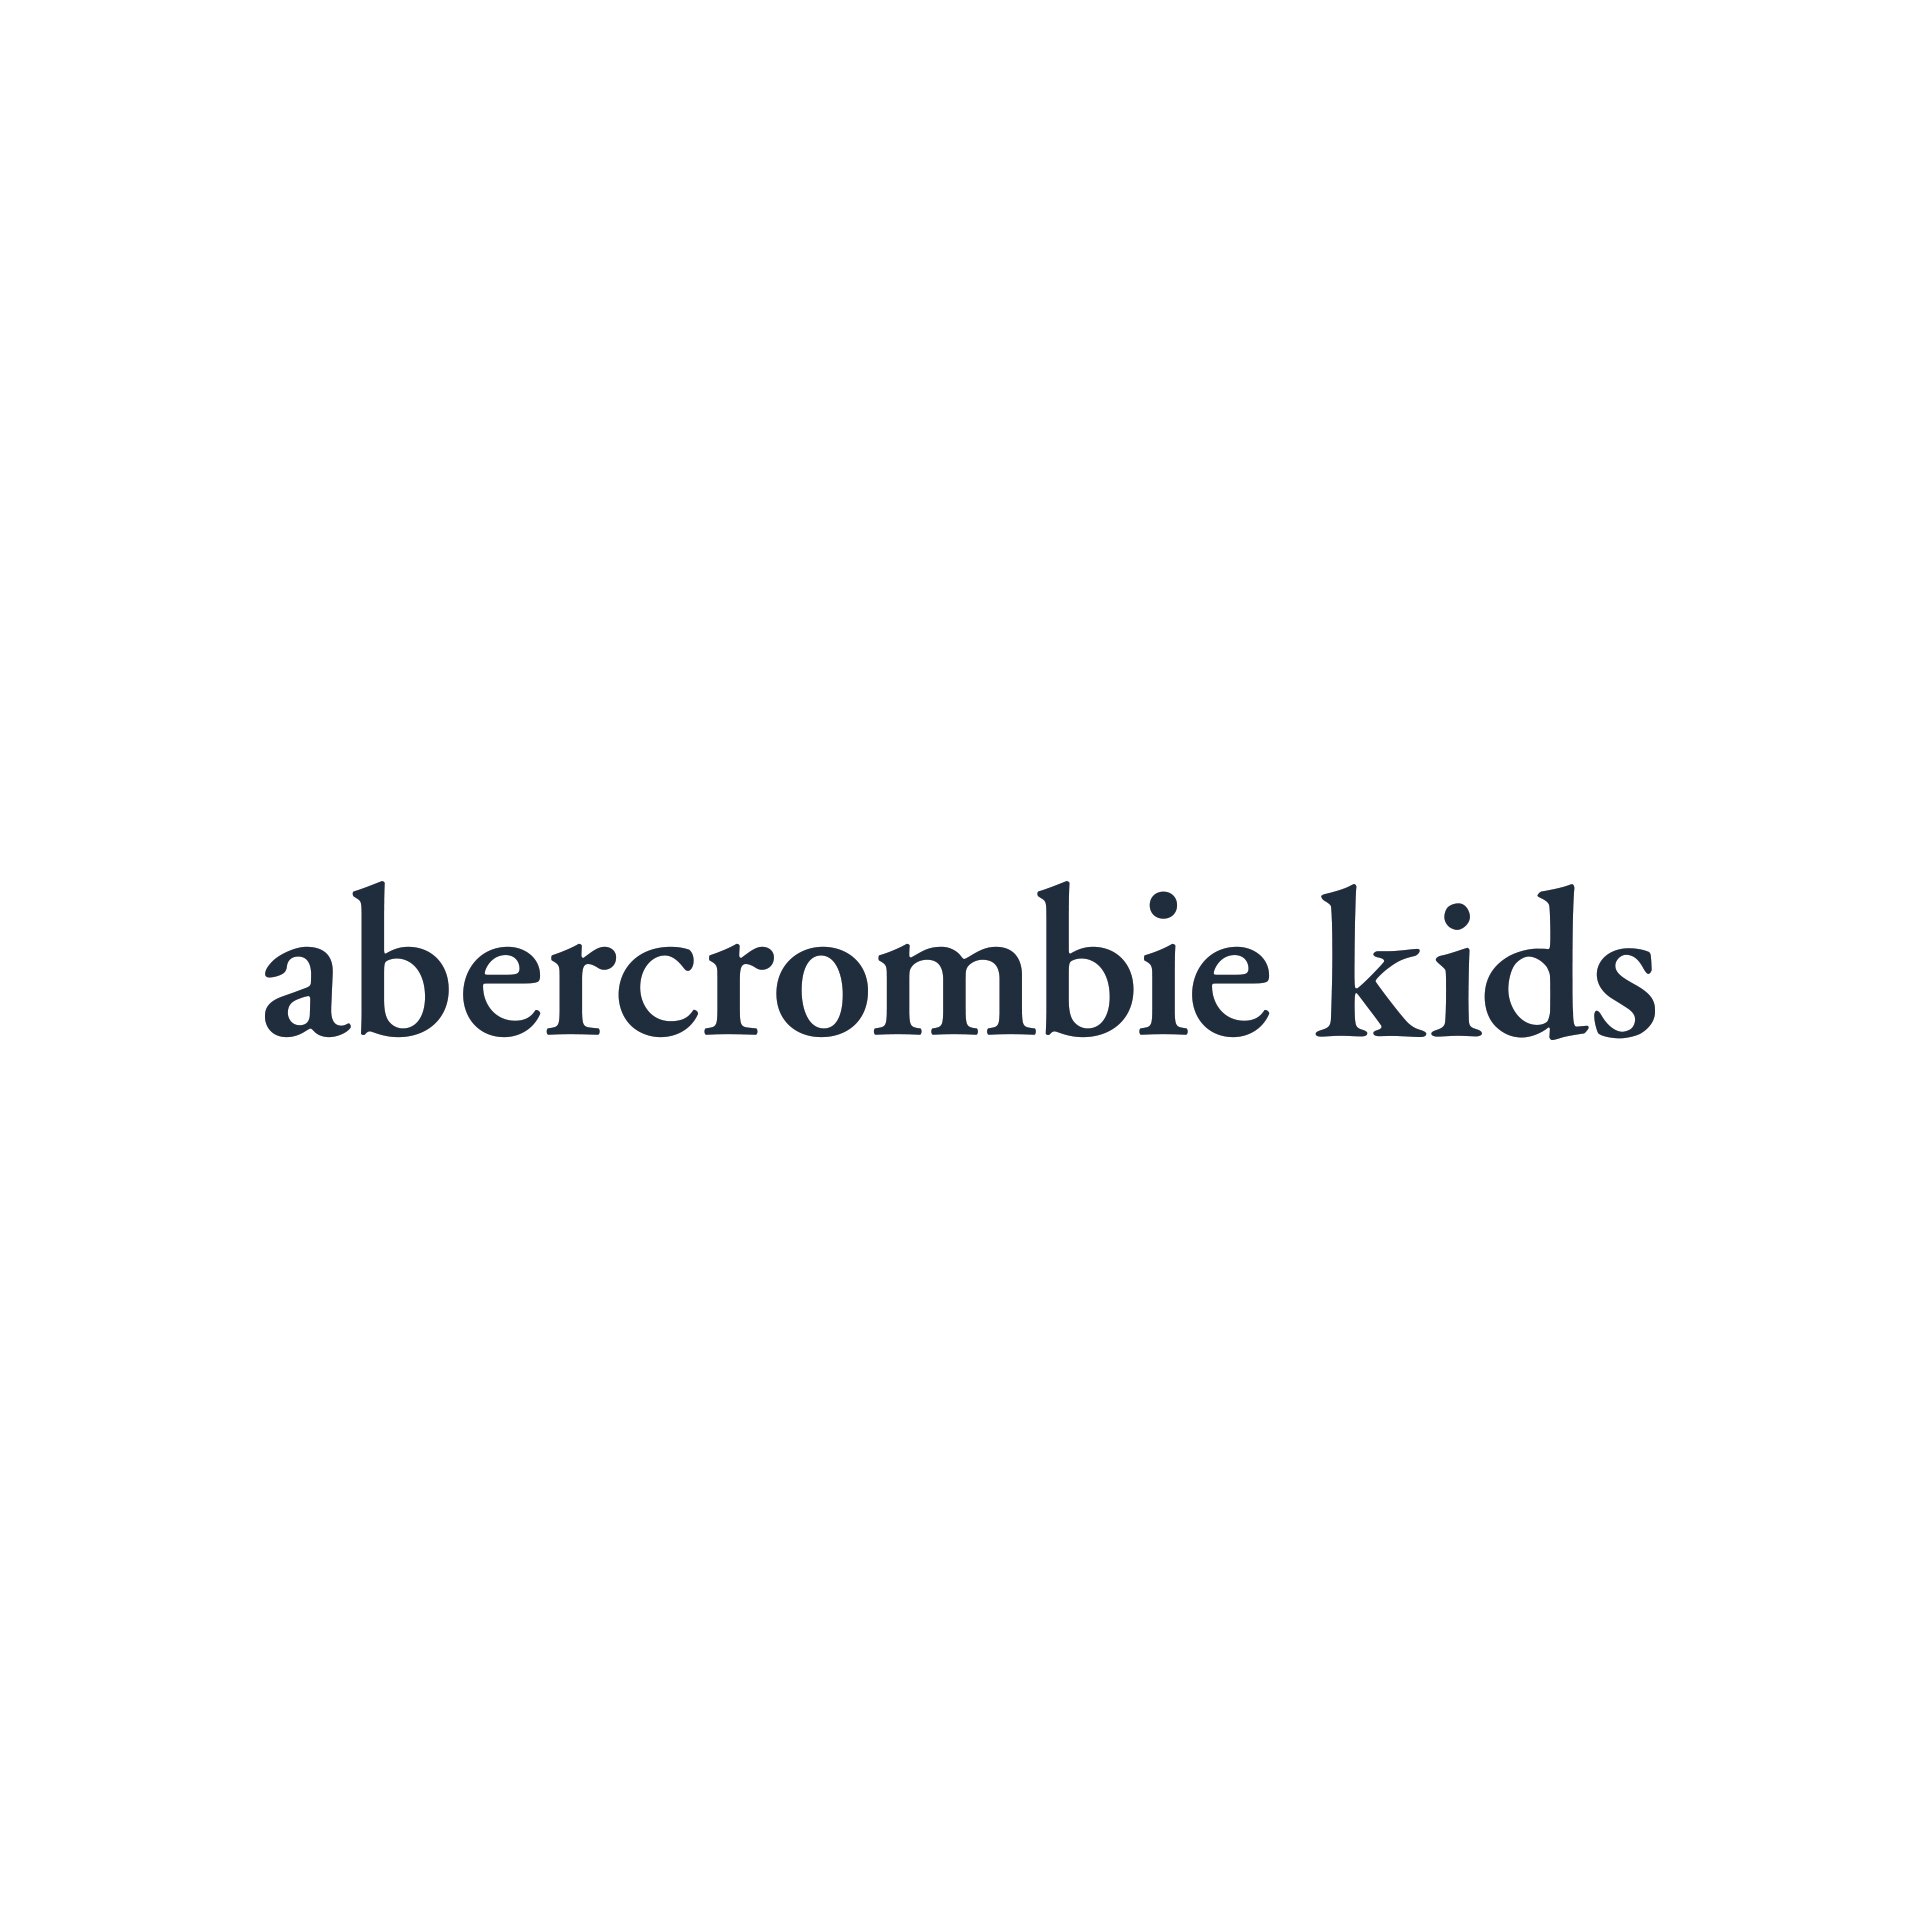 abercrombie and kids